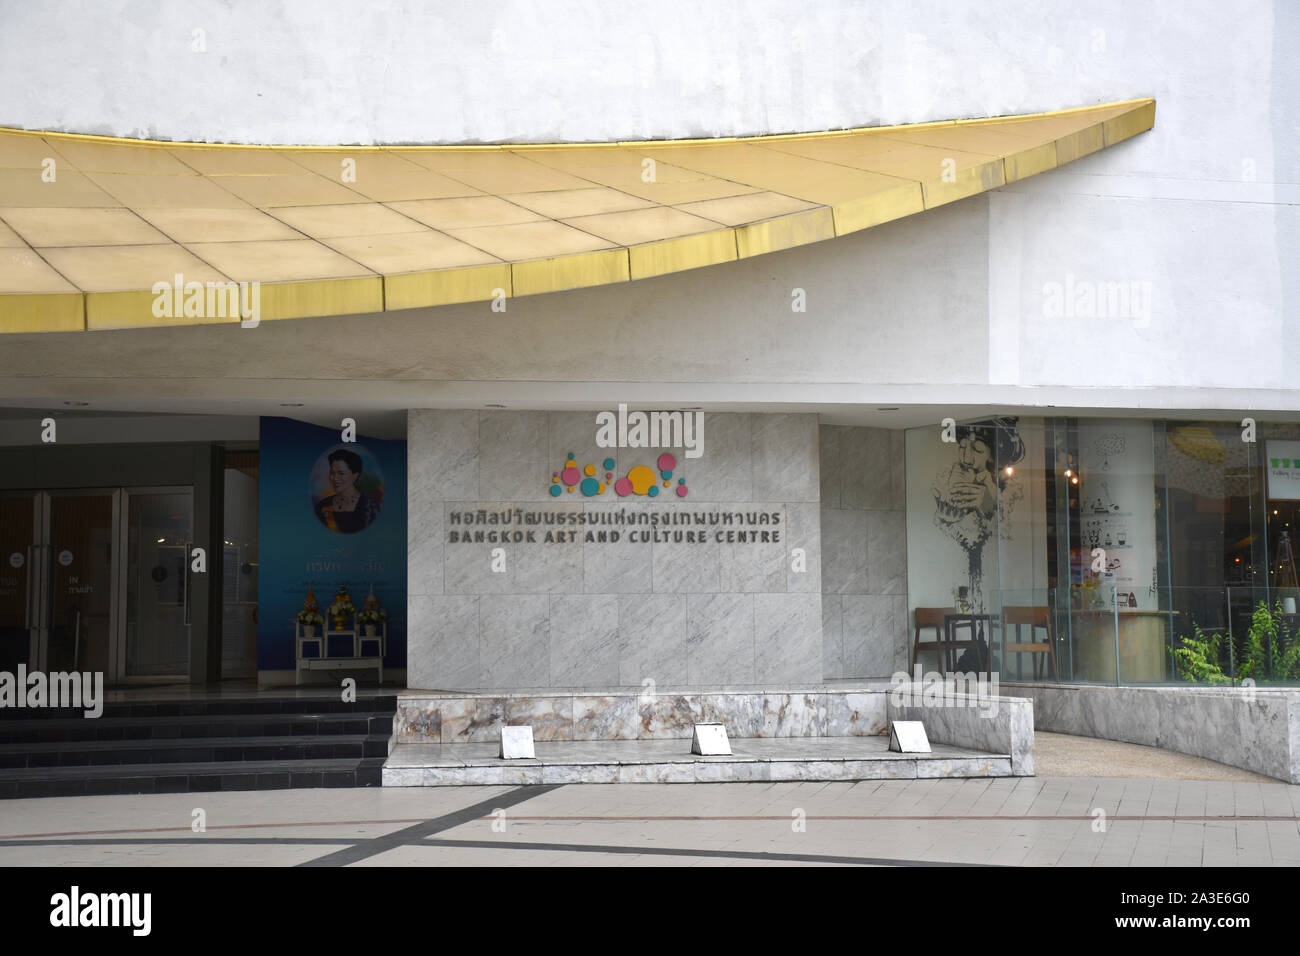 Bangkok, Thailand 08.23.2019: Entrance of the beautiful, modern and extraordinary Bangkok Art and Culture Centre or BACC which is the hub of Bangkok's Stock Photo